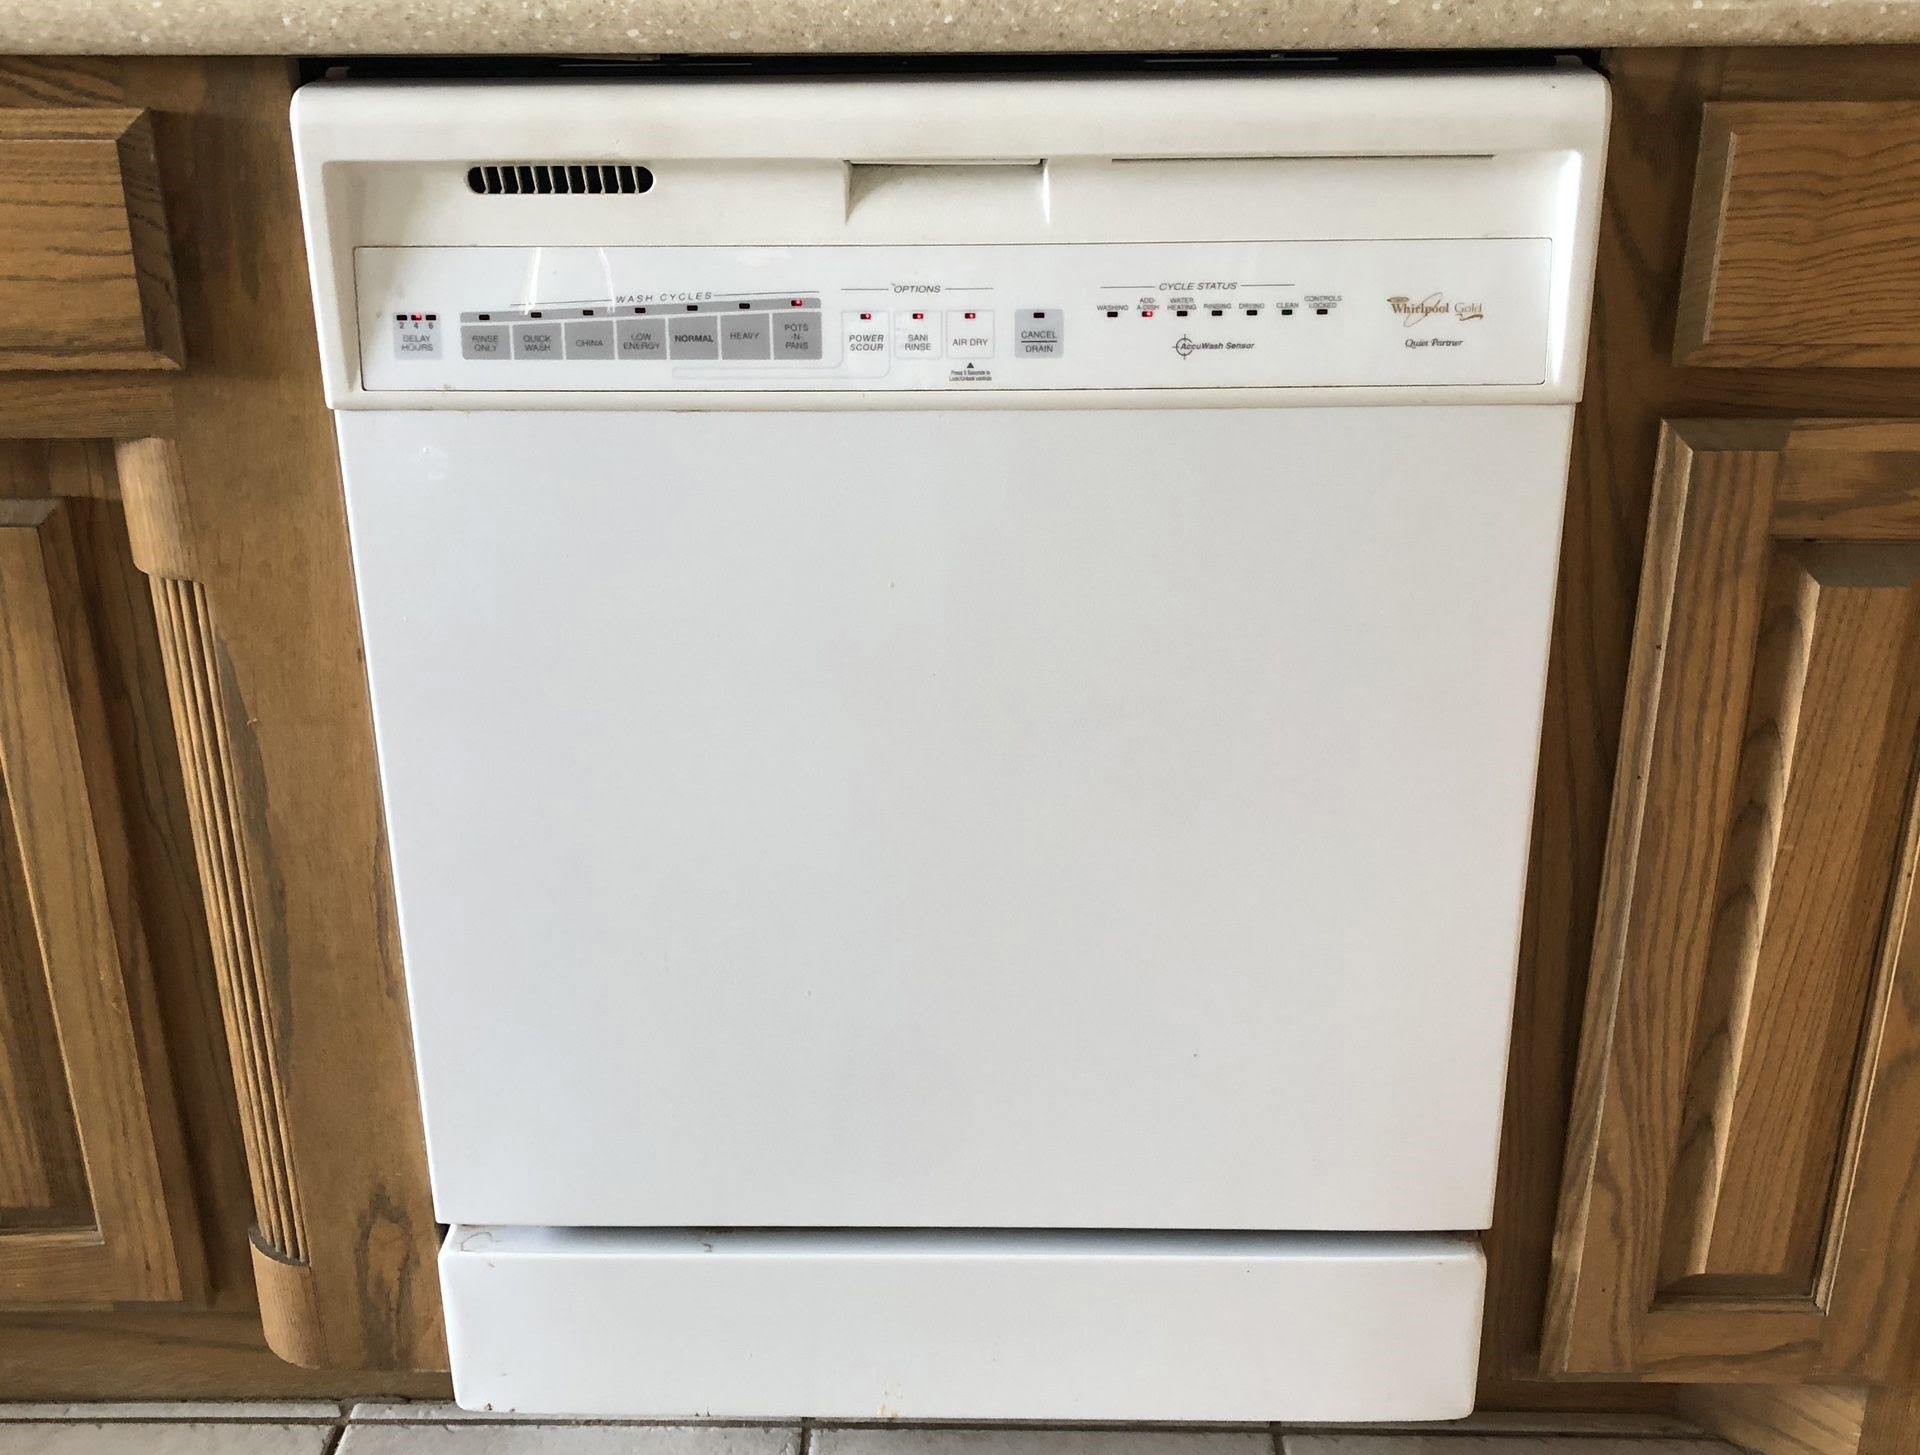 How To Fix The Error Code 45171 For Whirlpool Dishwasher